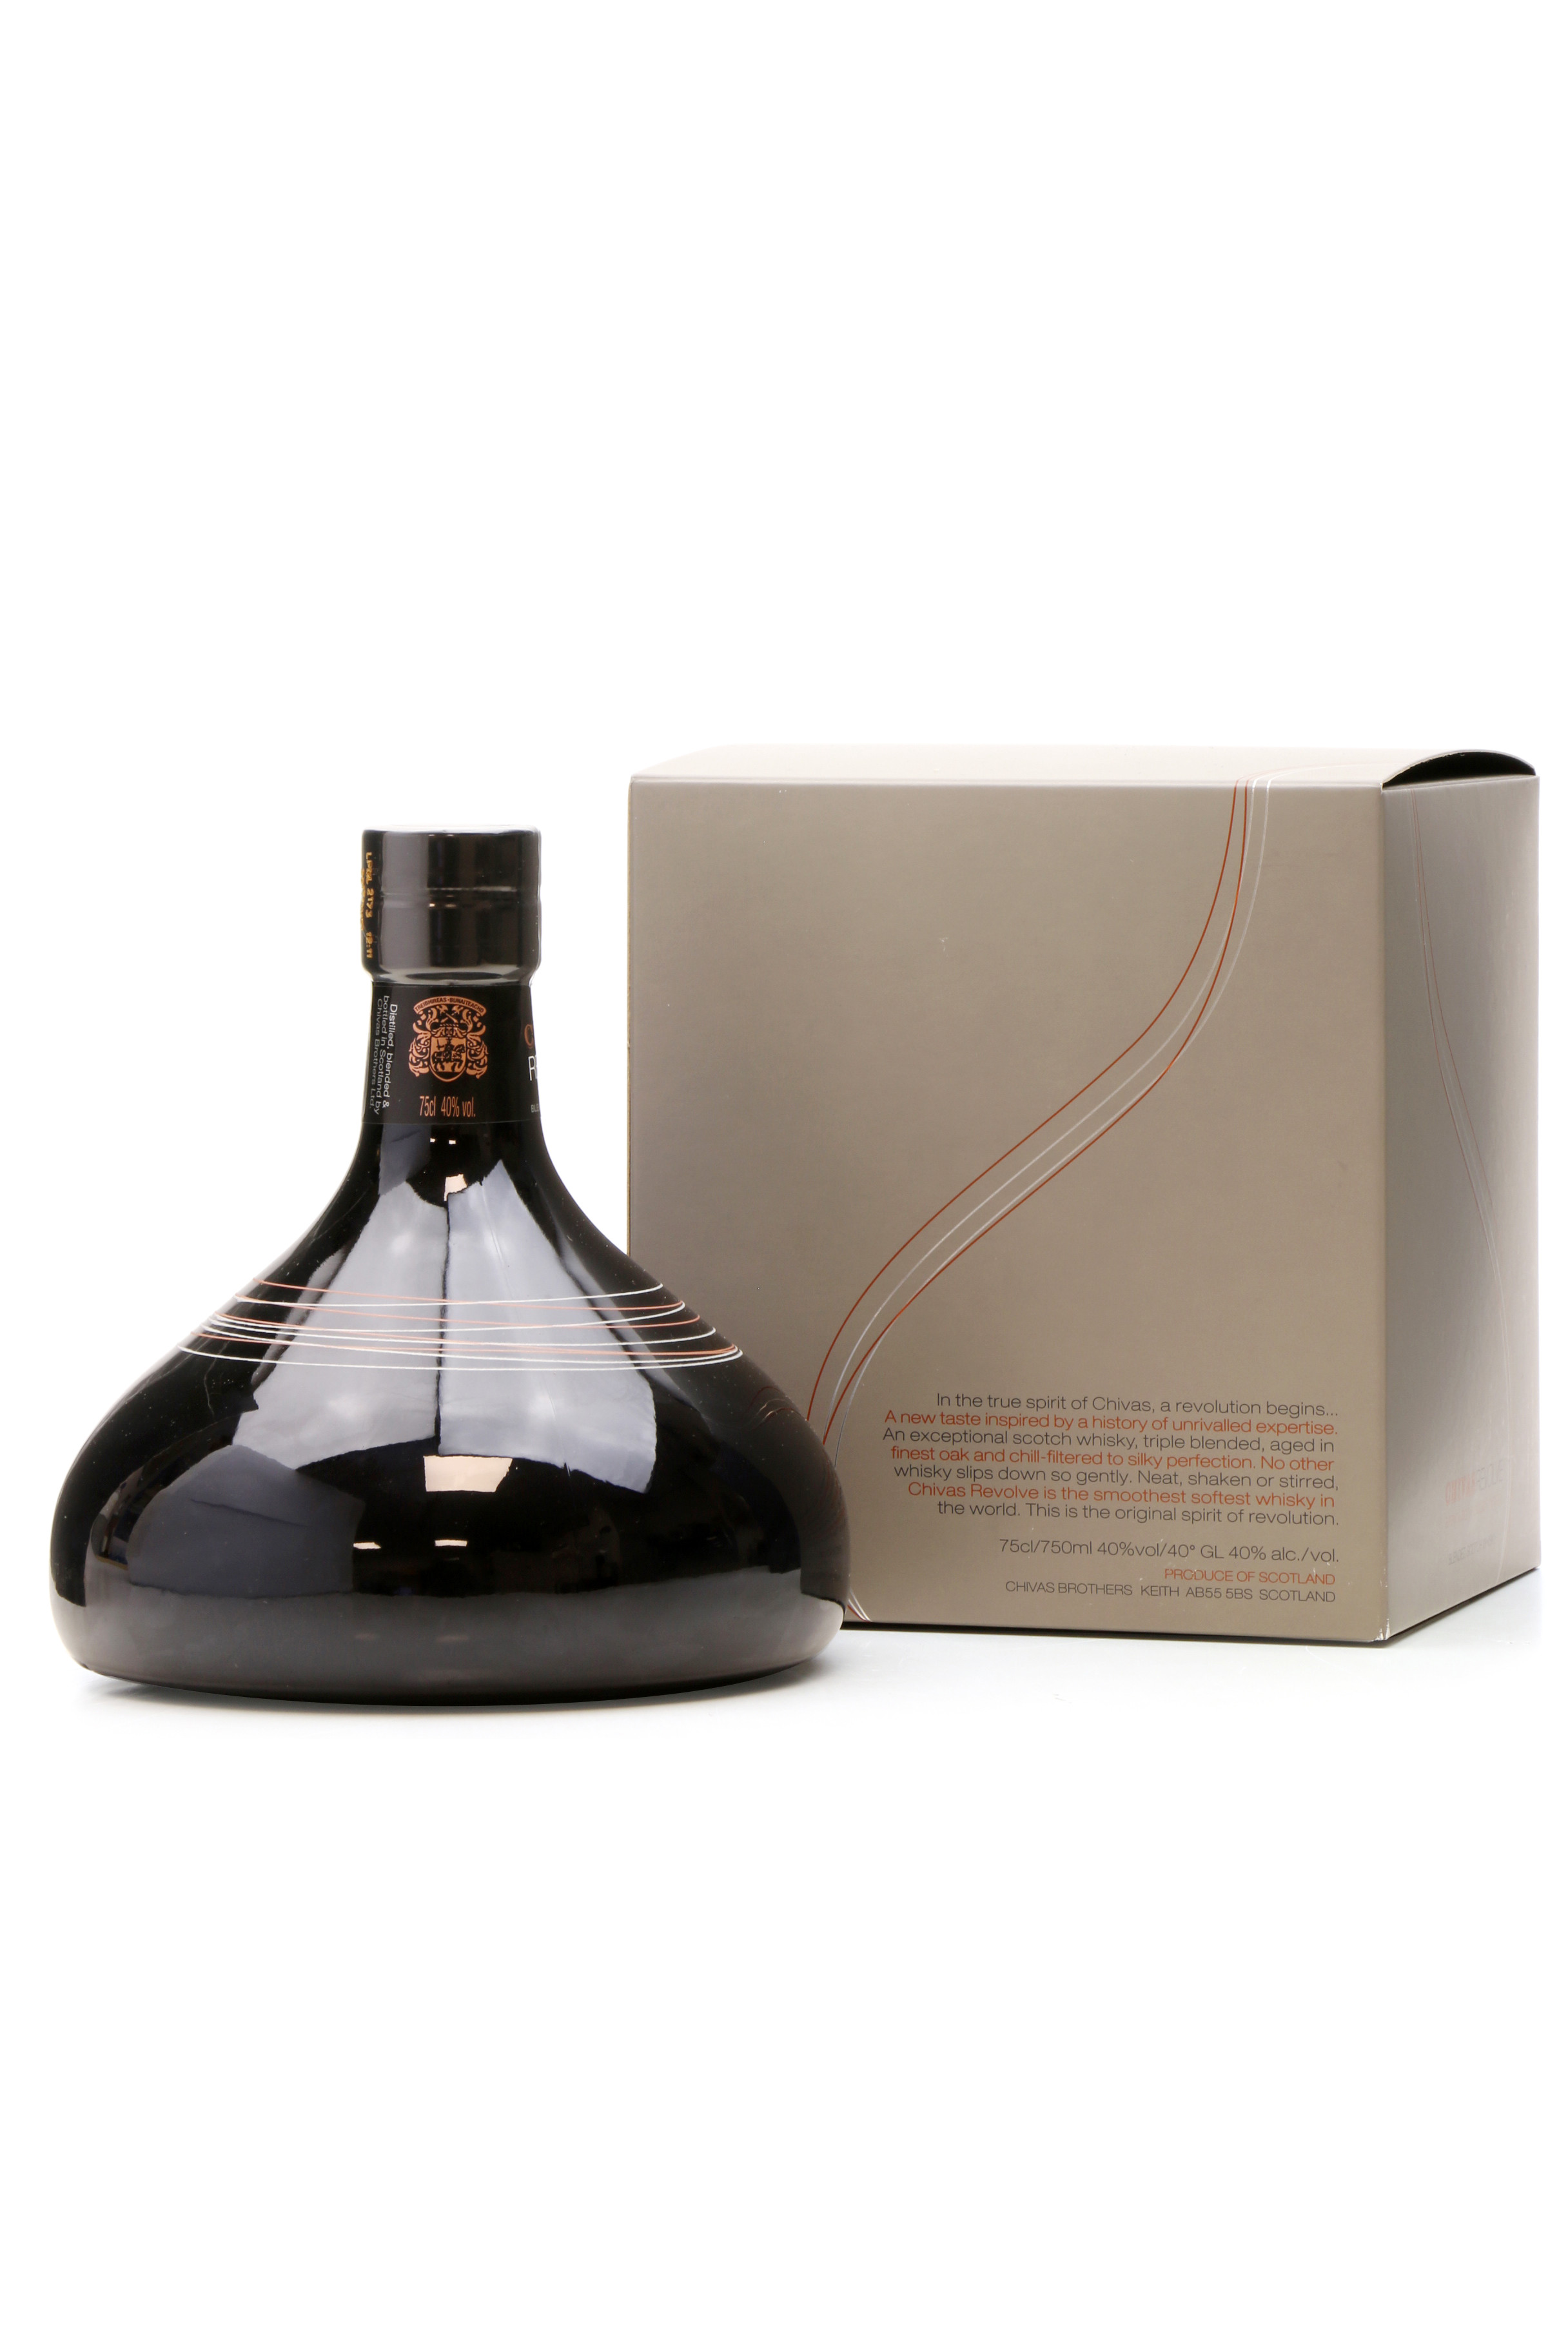 Chivas Revolve (75cl) - Just Whisky Auctions